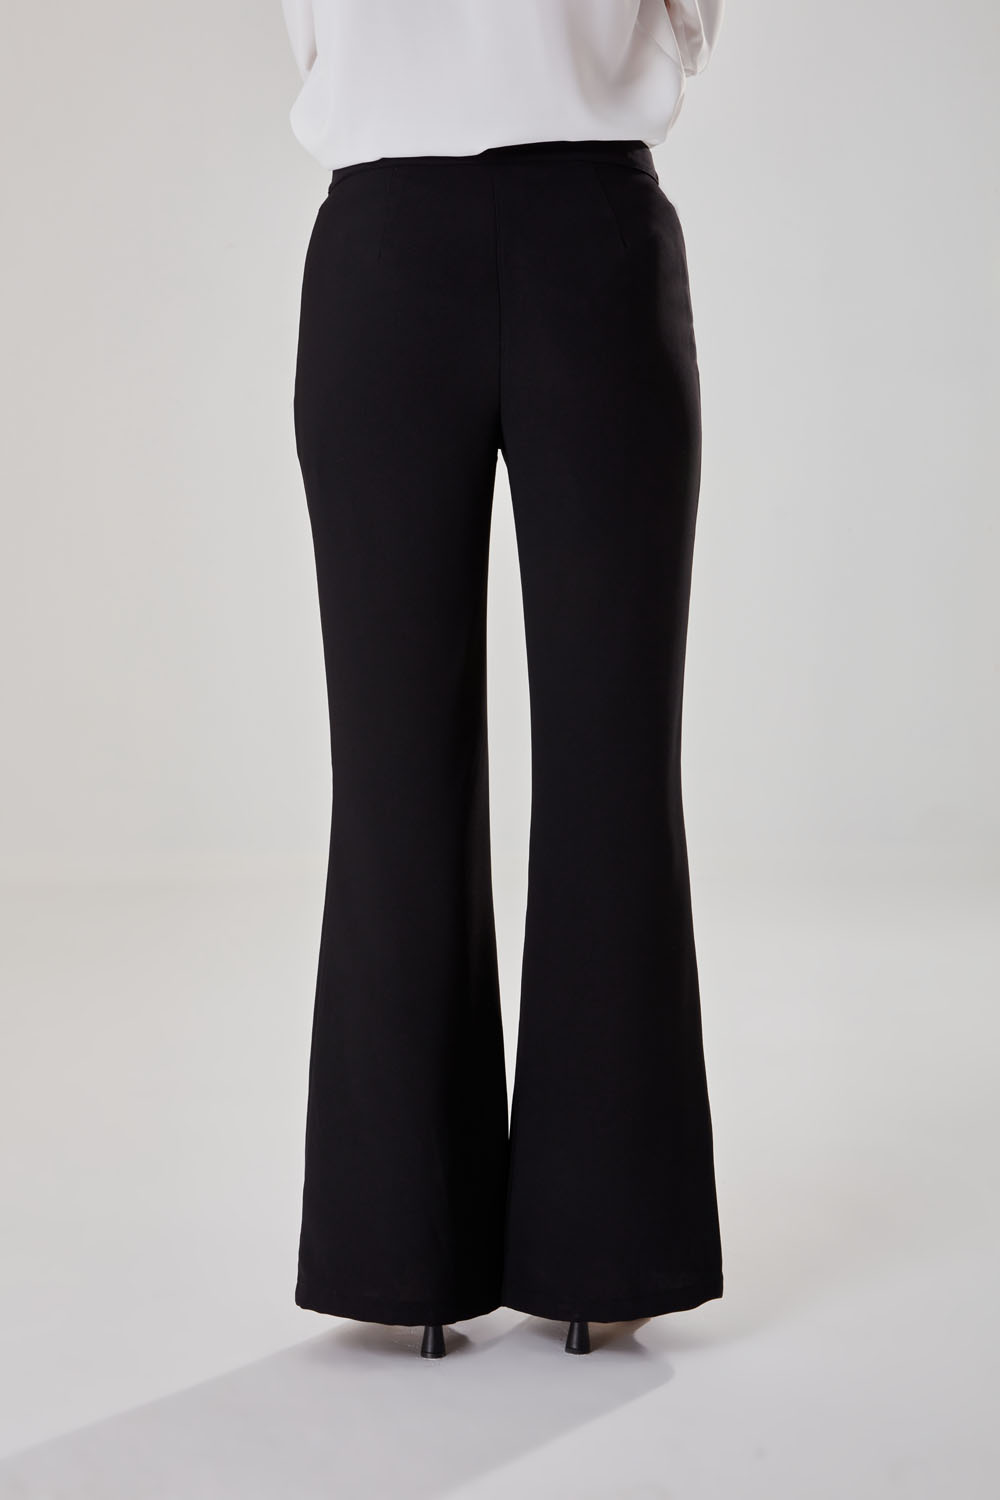 Black Woven Trousers With Sewing Slitt